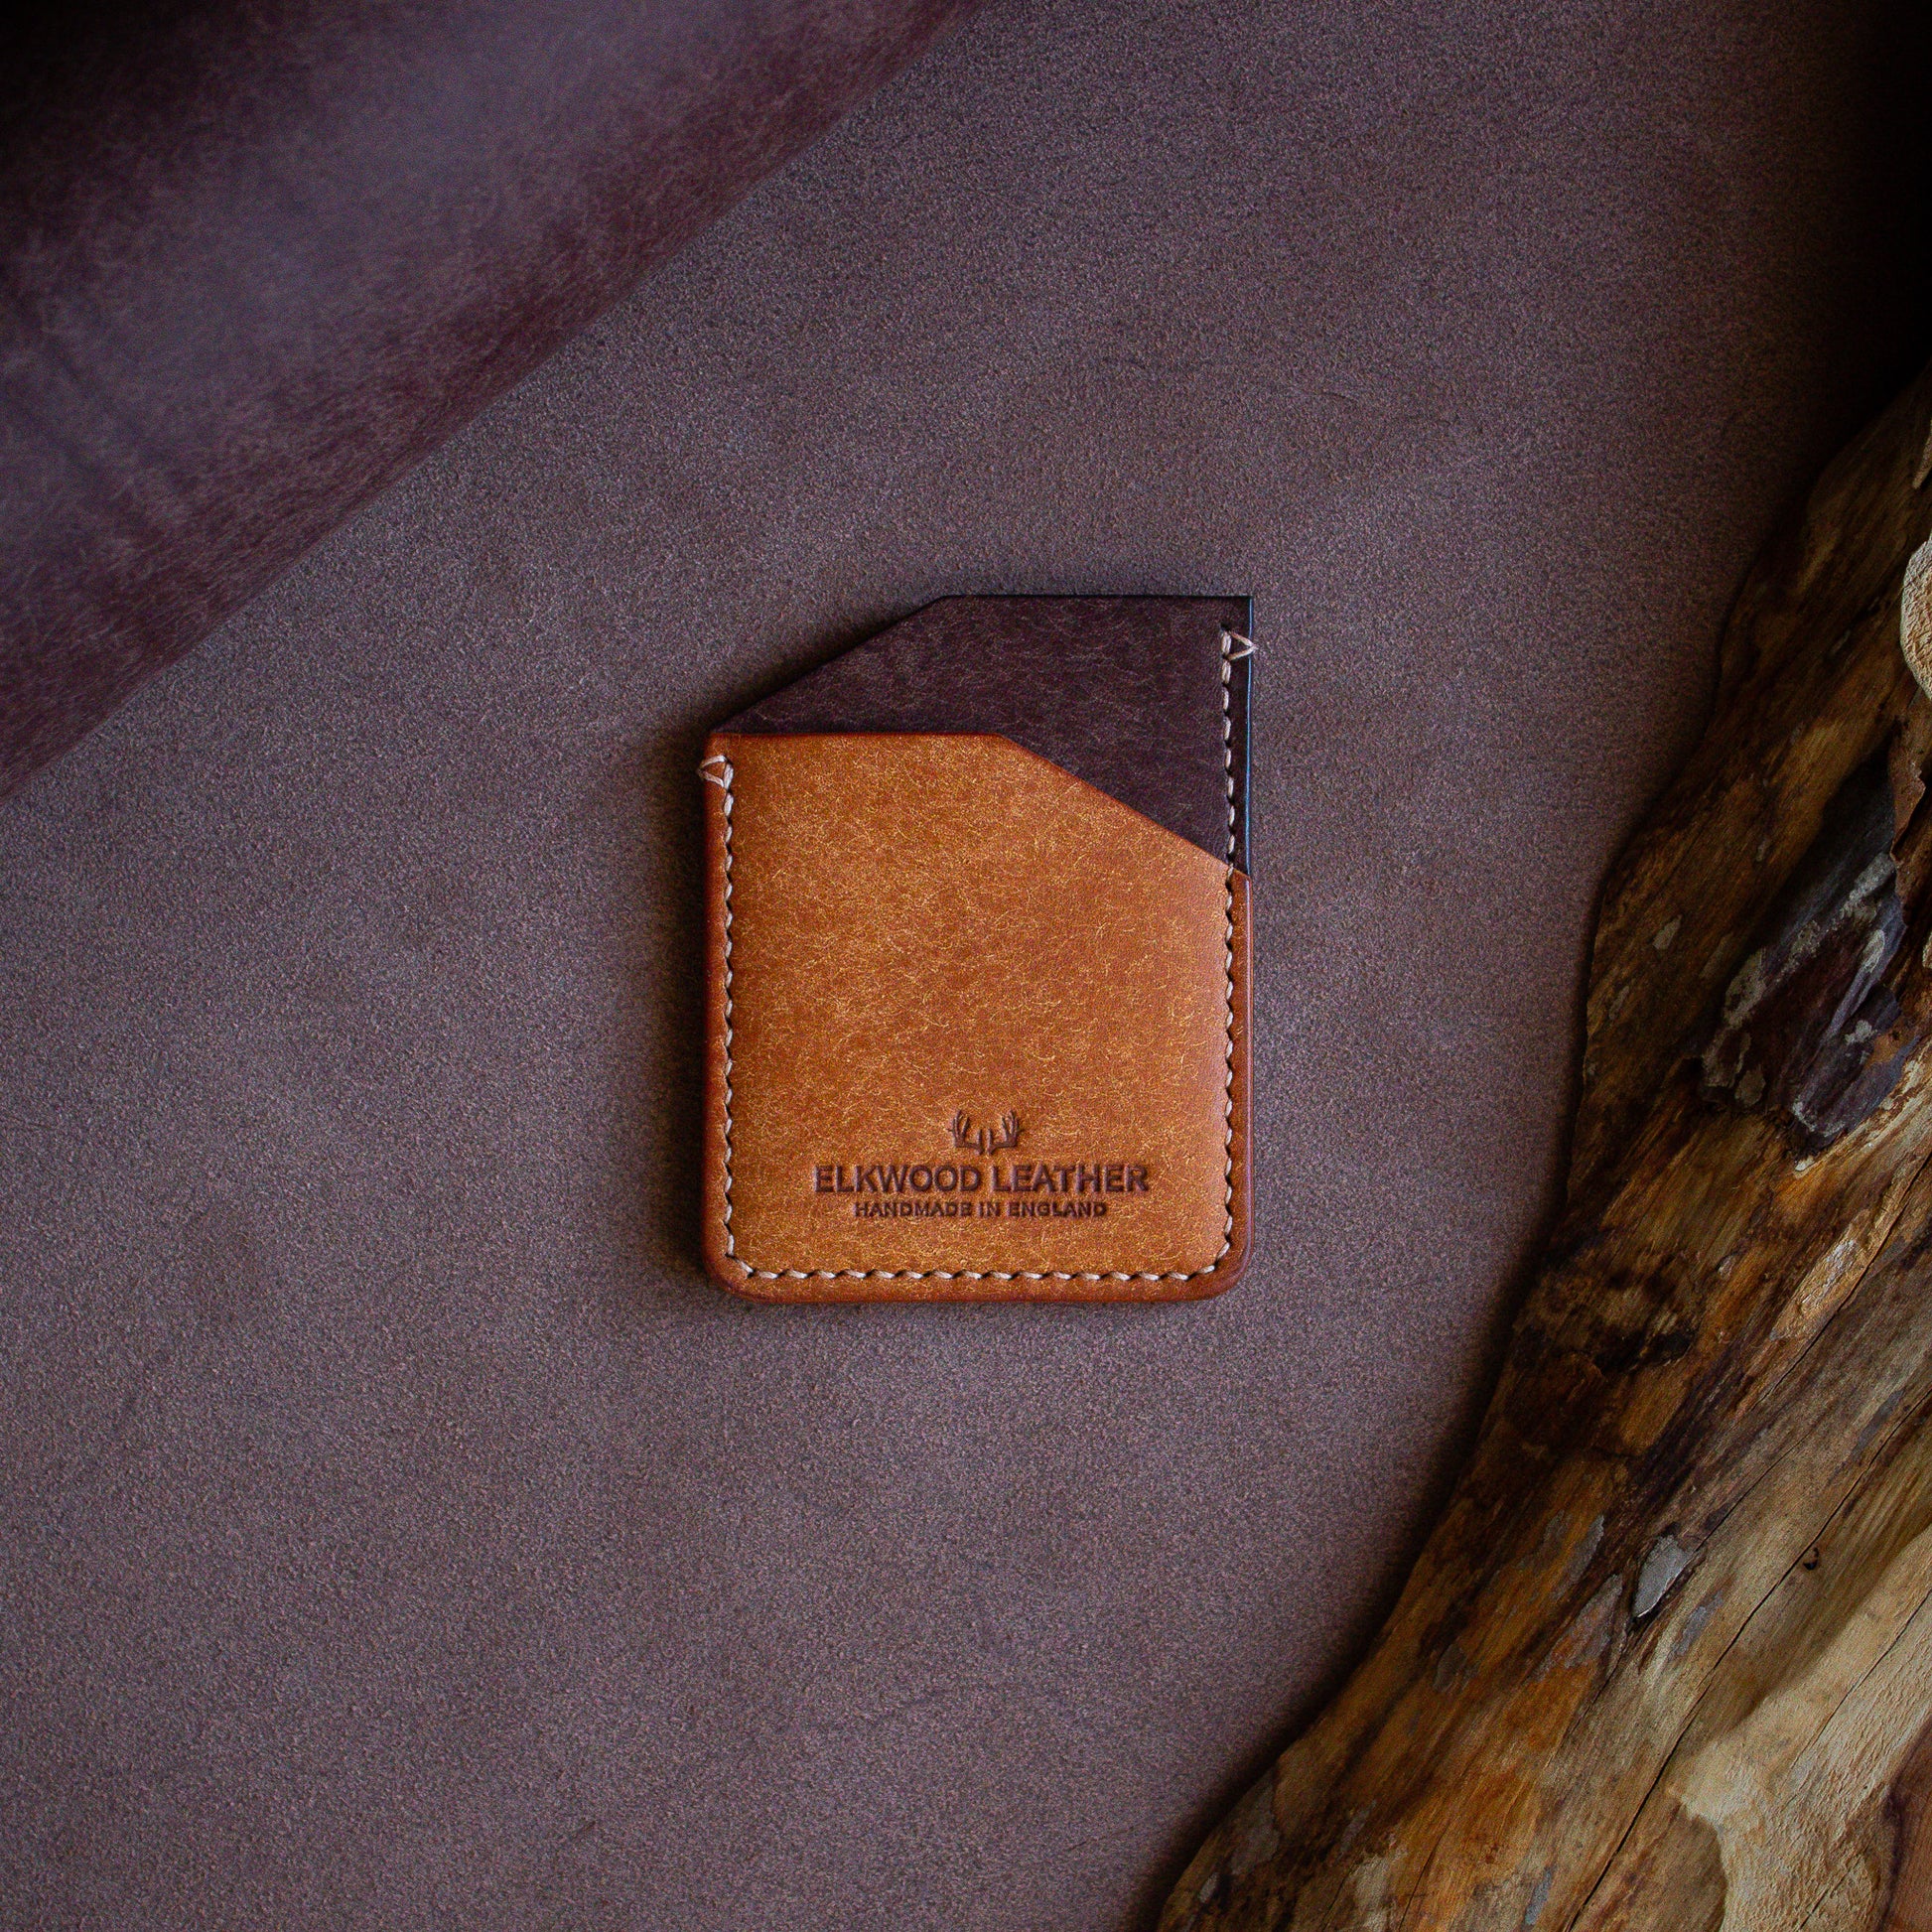 LEATHER DIY TEMPLATE - Elkwood Leather - The Maple - minimalist full grain Italian Pueblo leather cardholder wallet on roll of leather next to wood grain